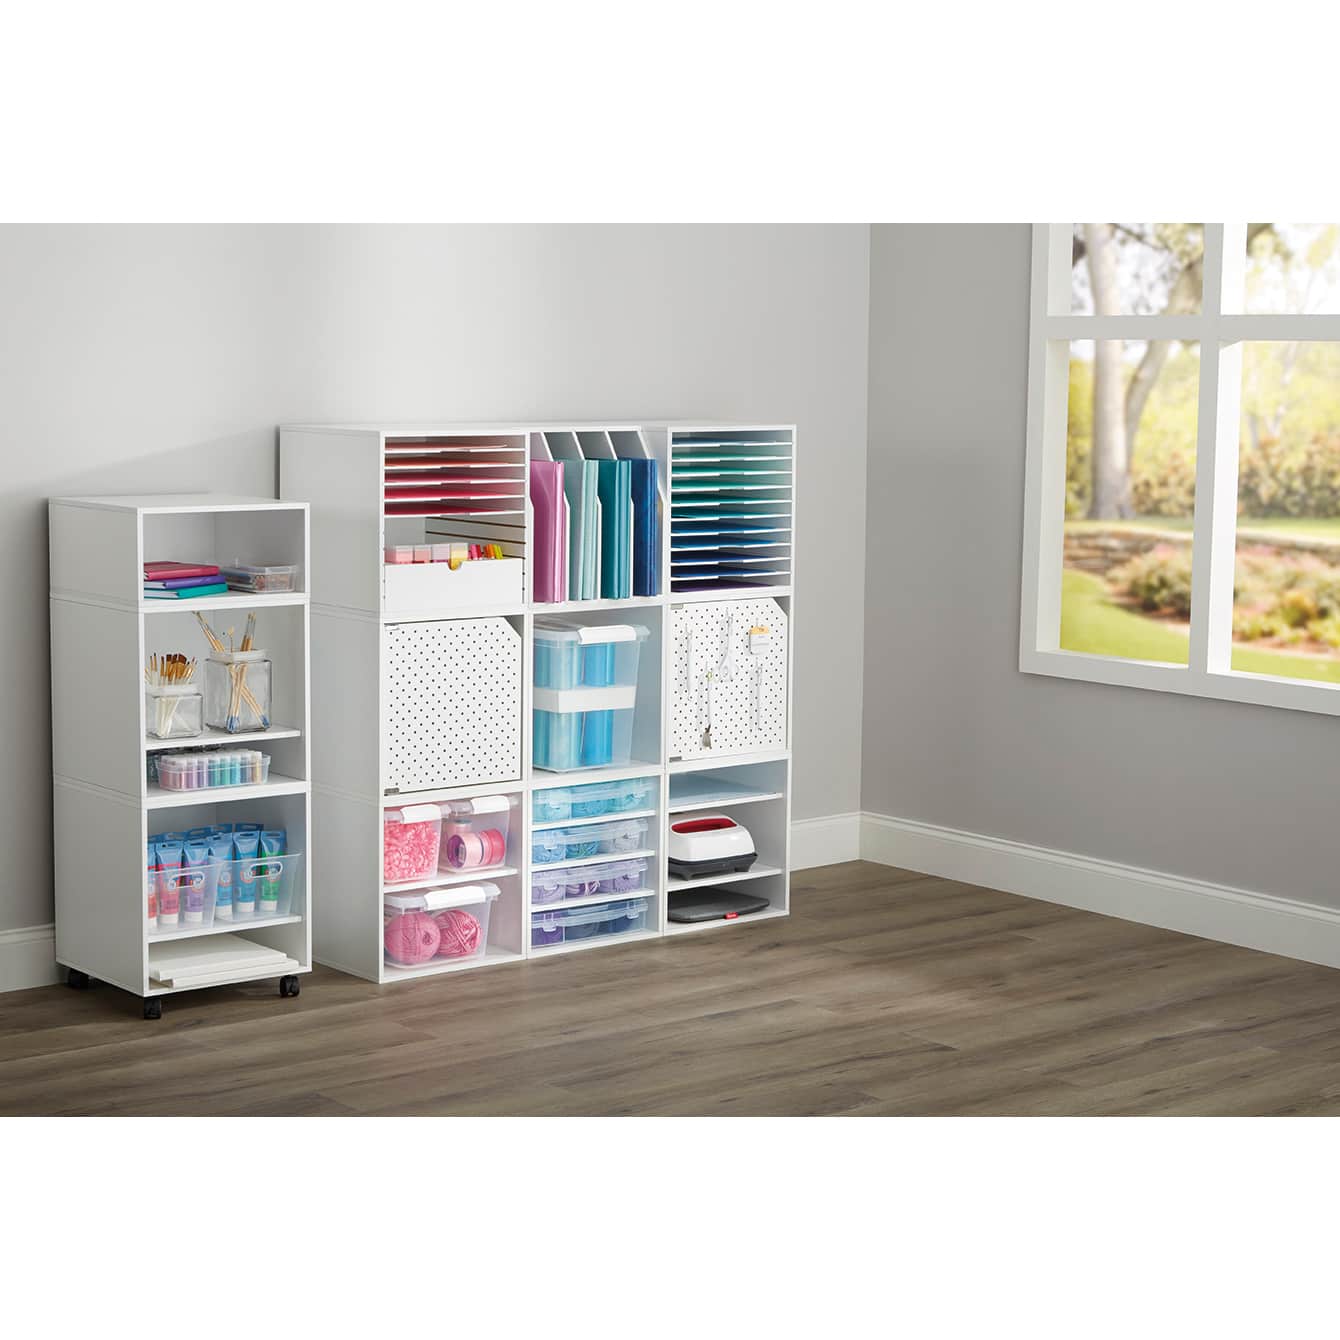 Simply Tidy Modular Storage from @Michaels Stores #ad offers tons